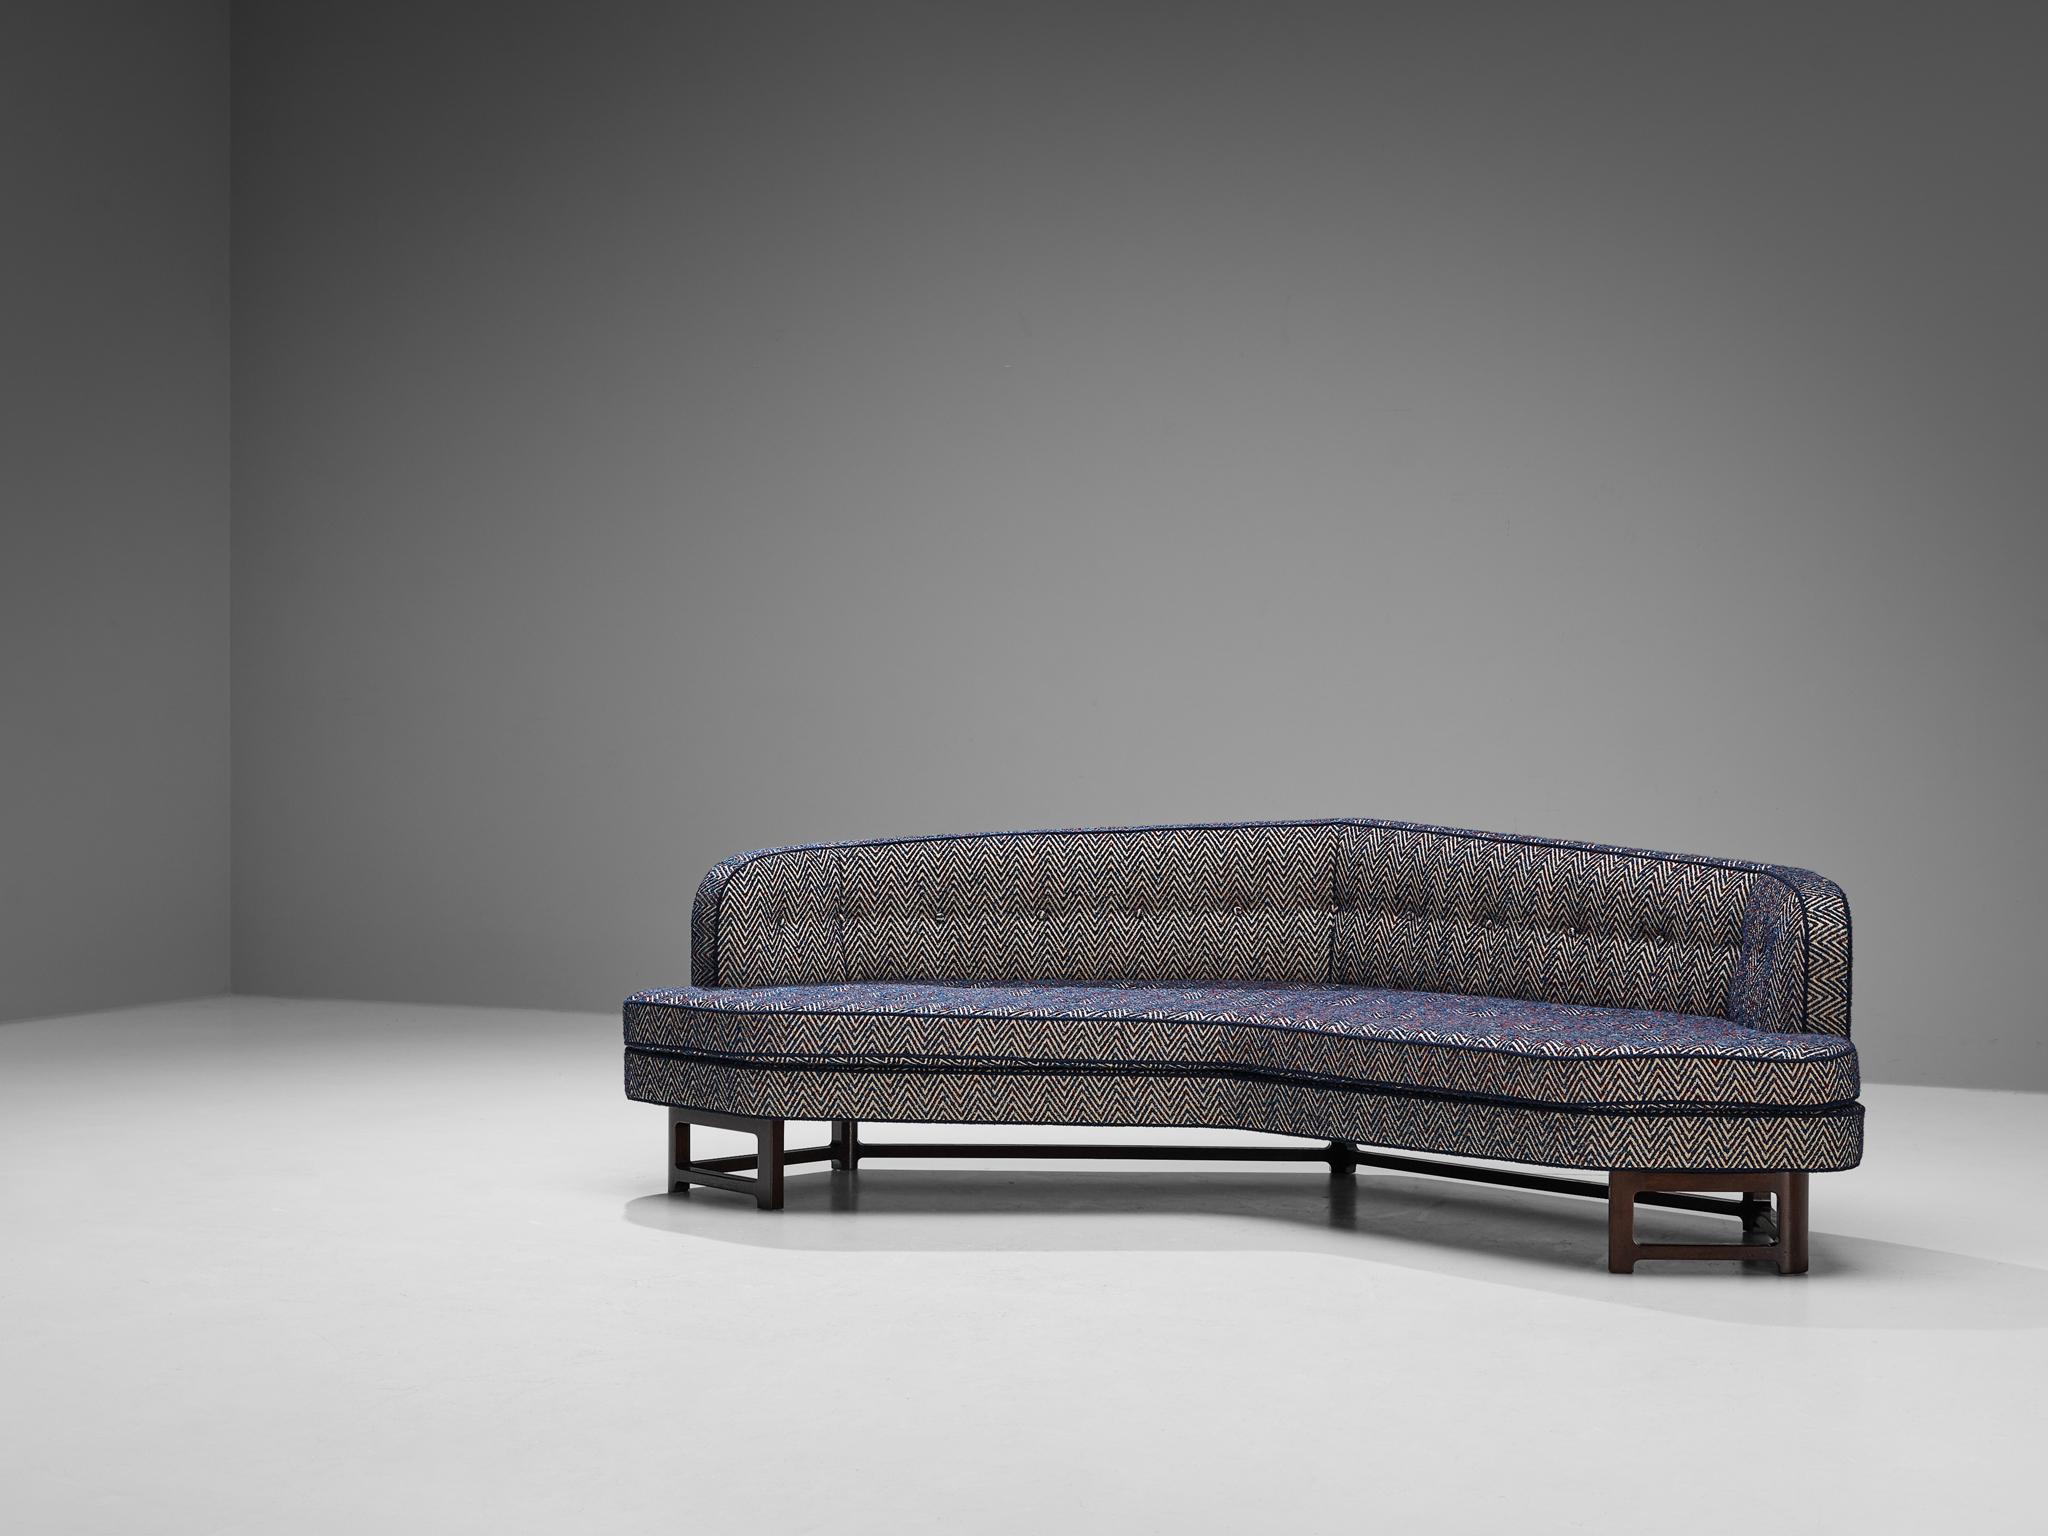 Edward Wormley for Dunbar 'Janus' Sofa in Multicolored Patterned Upholstery  1